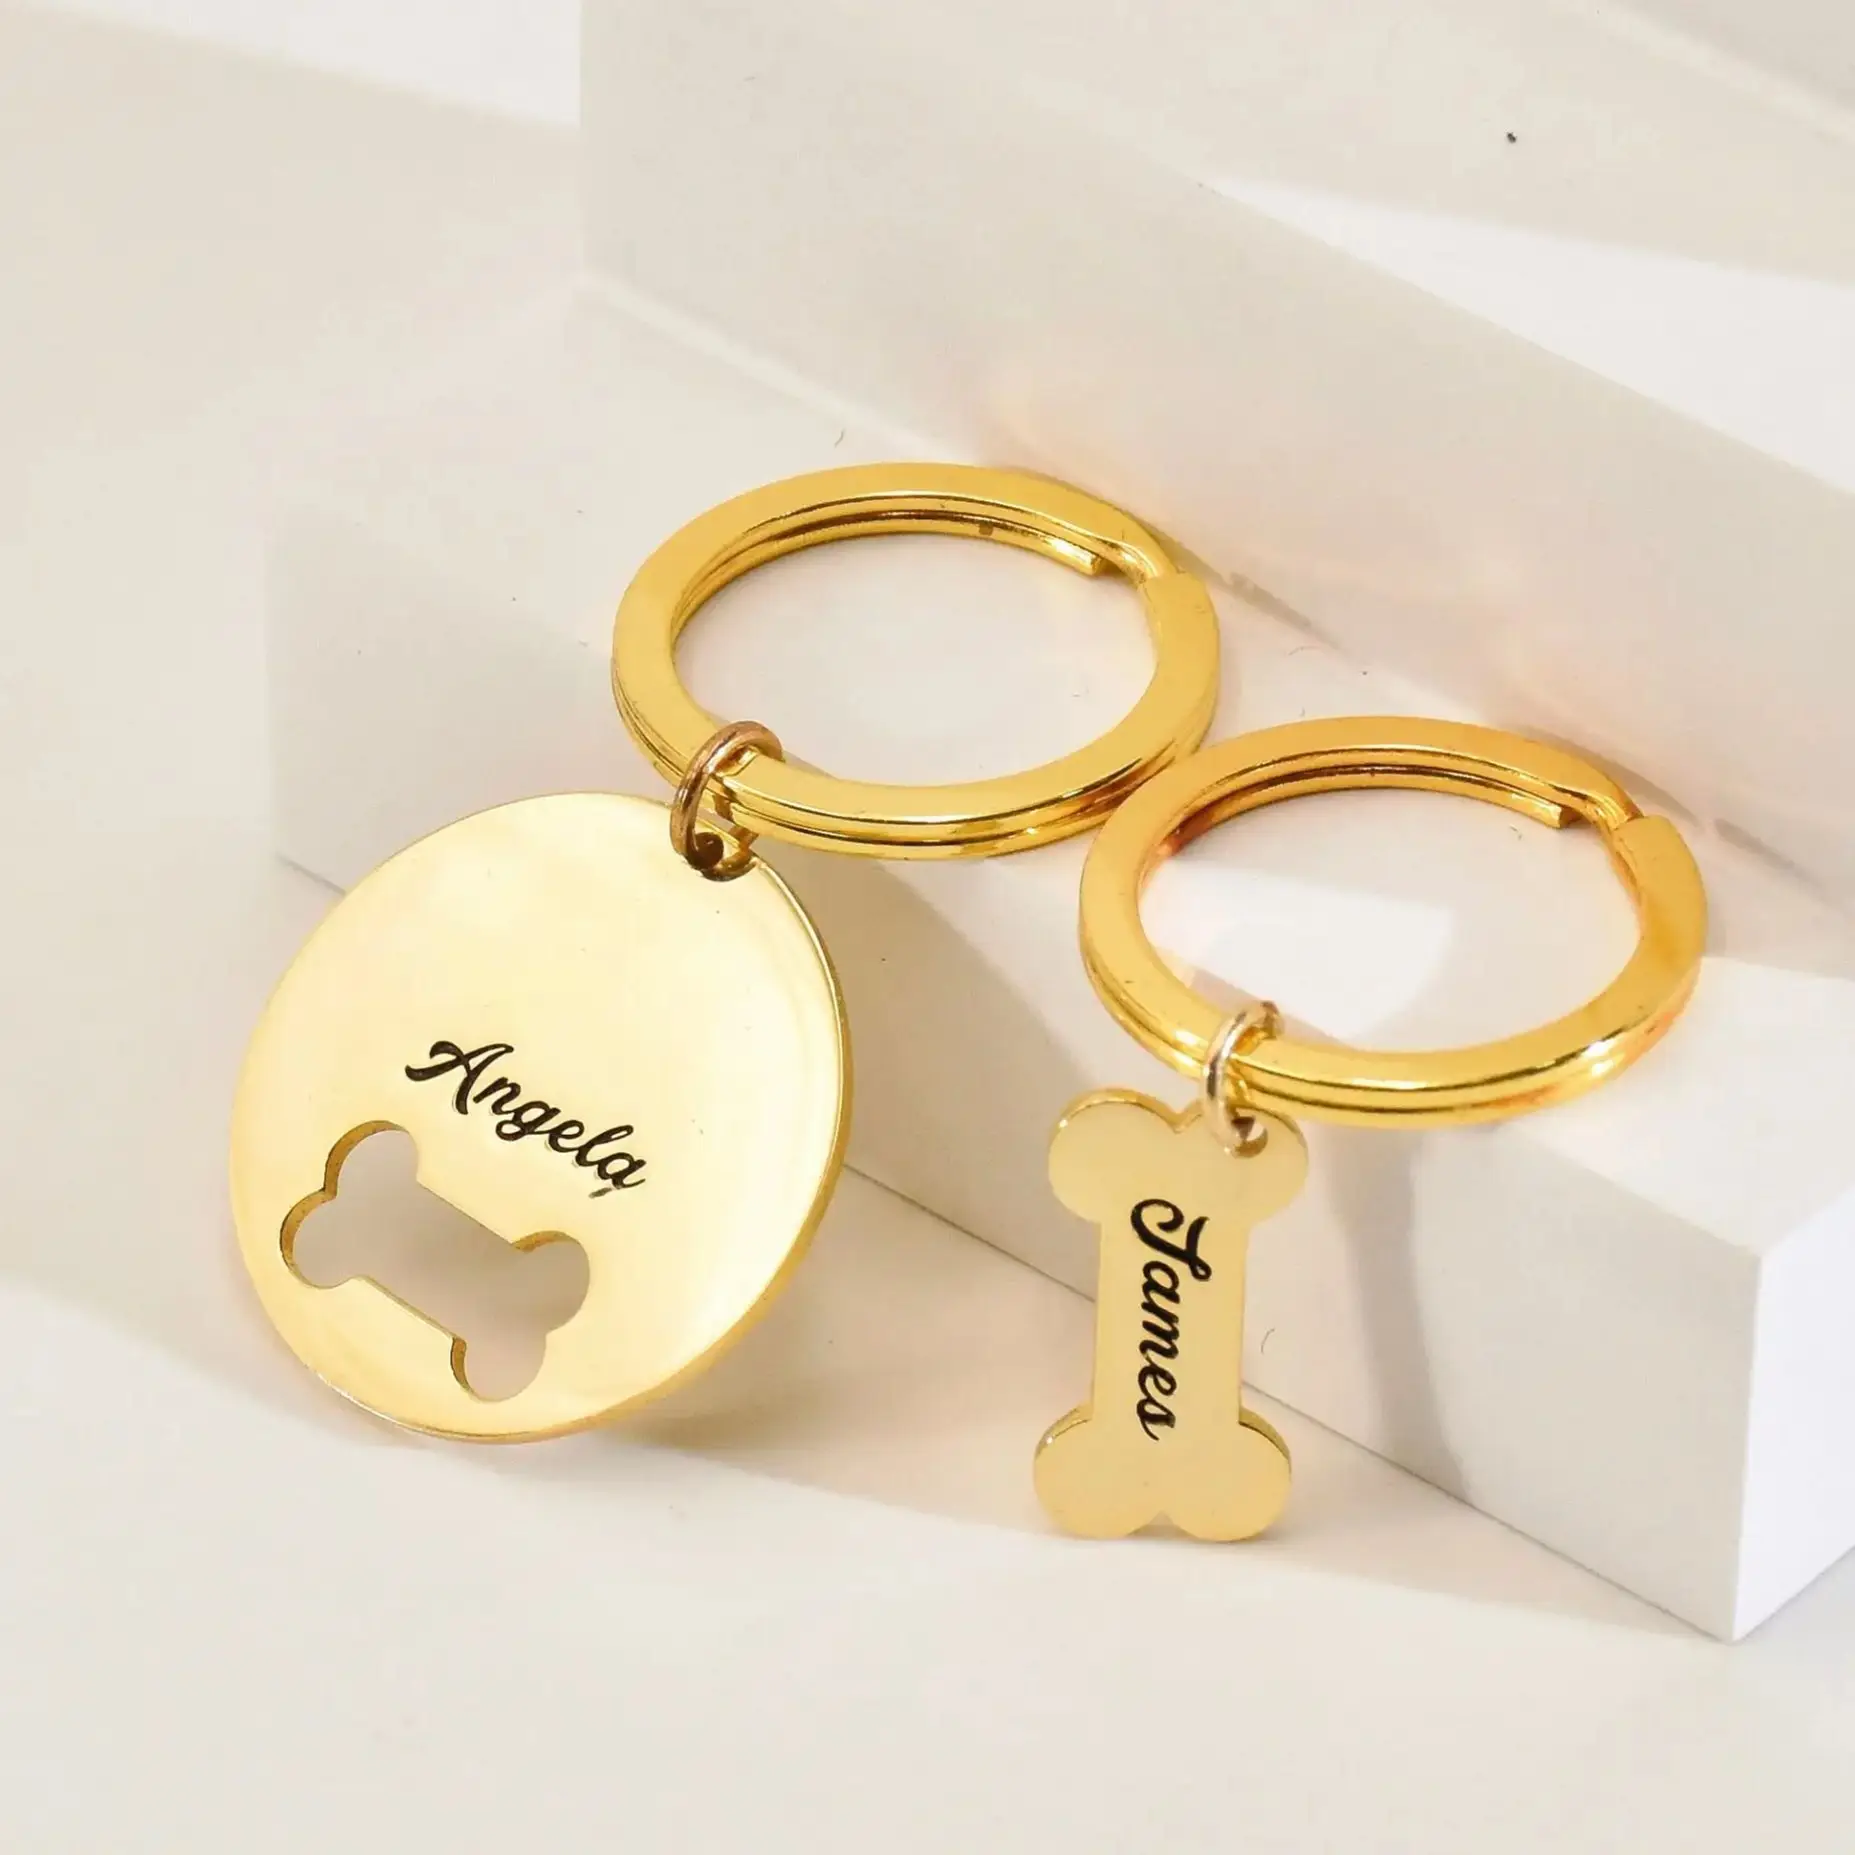 Personalized Dog Bone Keychain Round Custom Silver Coin Pet Keychain Engraved Name Dog Anniversary Gift For Women